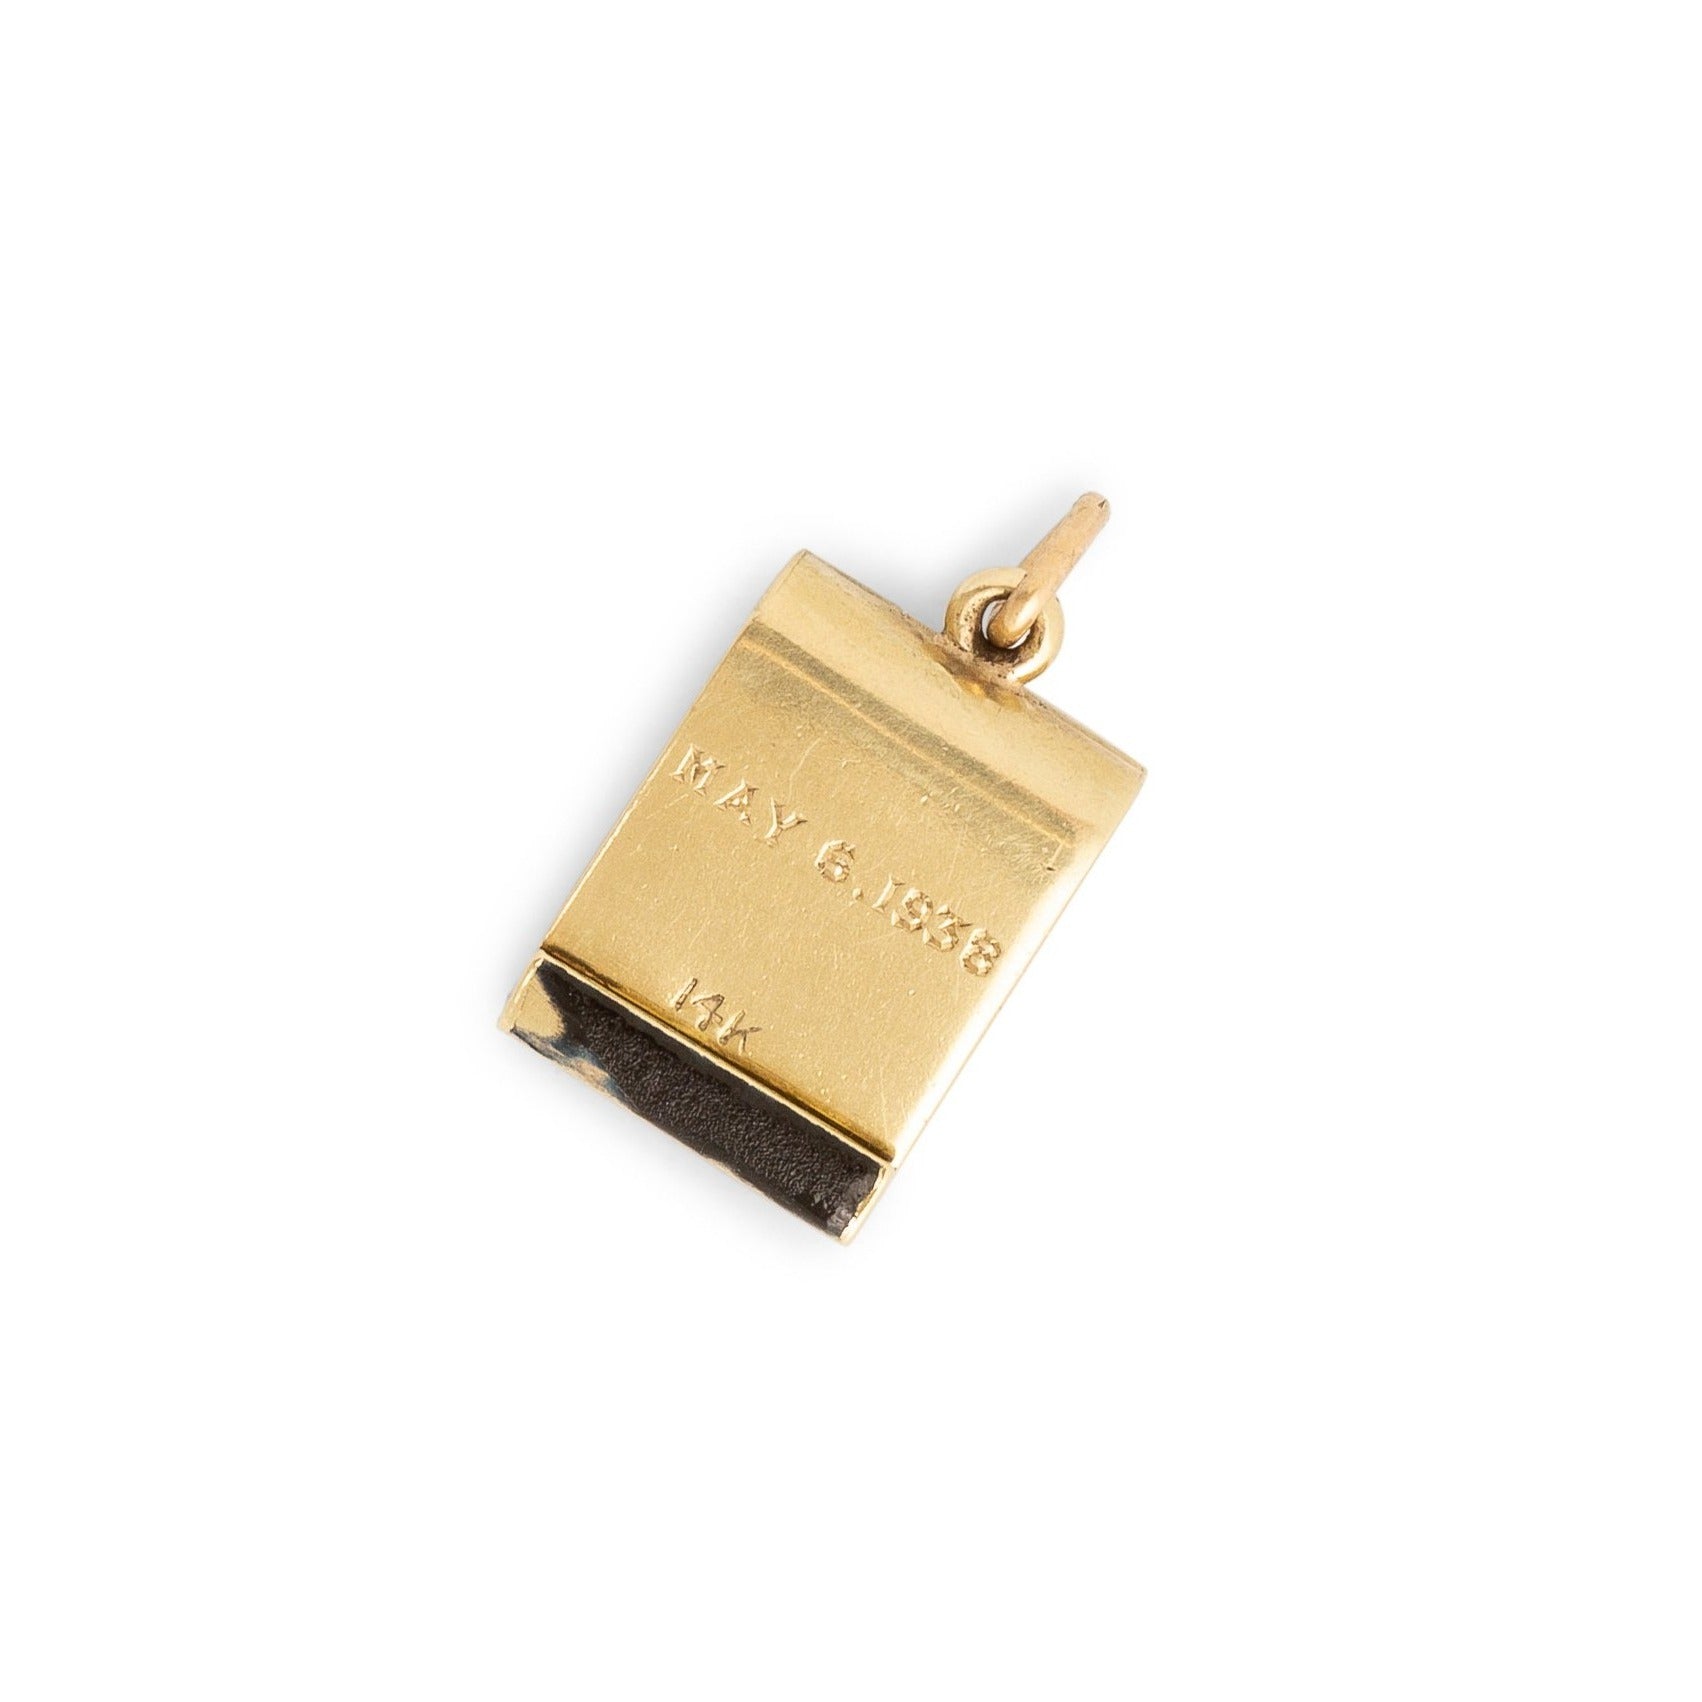 Movable Book of Matches Enamel and 14k Gold Charm